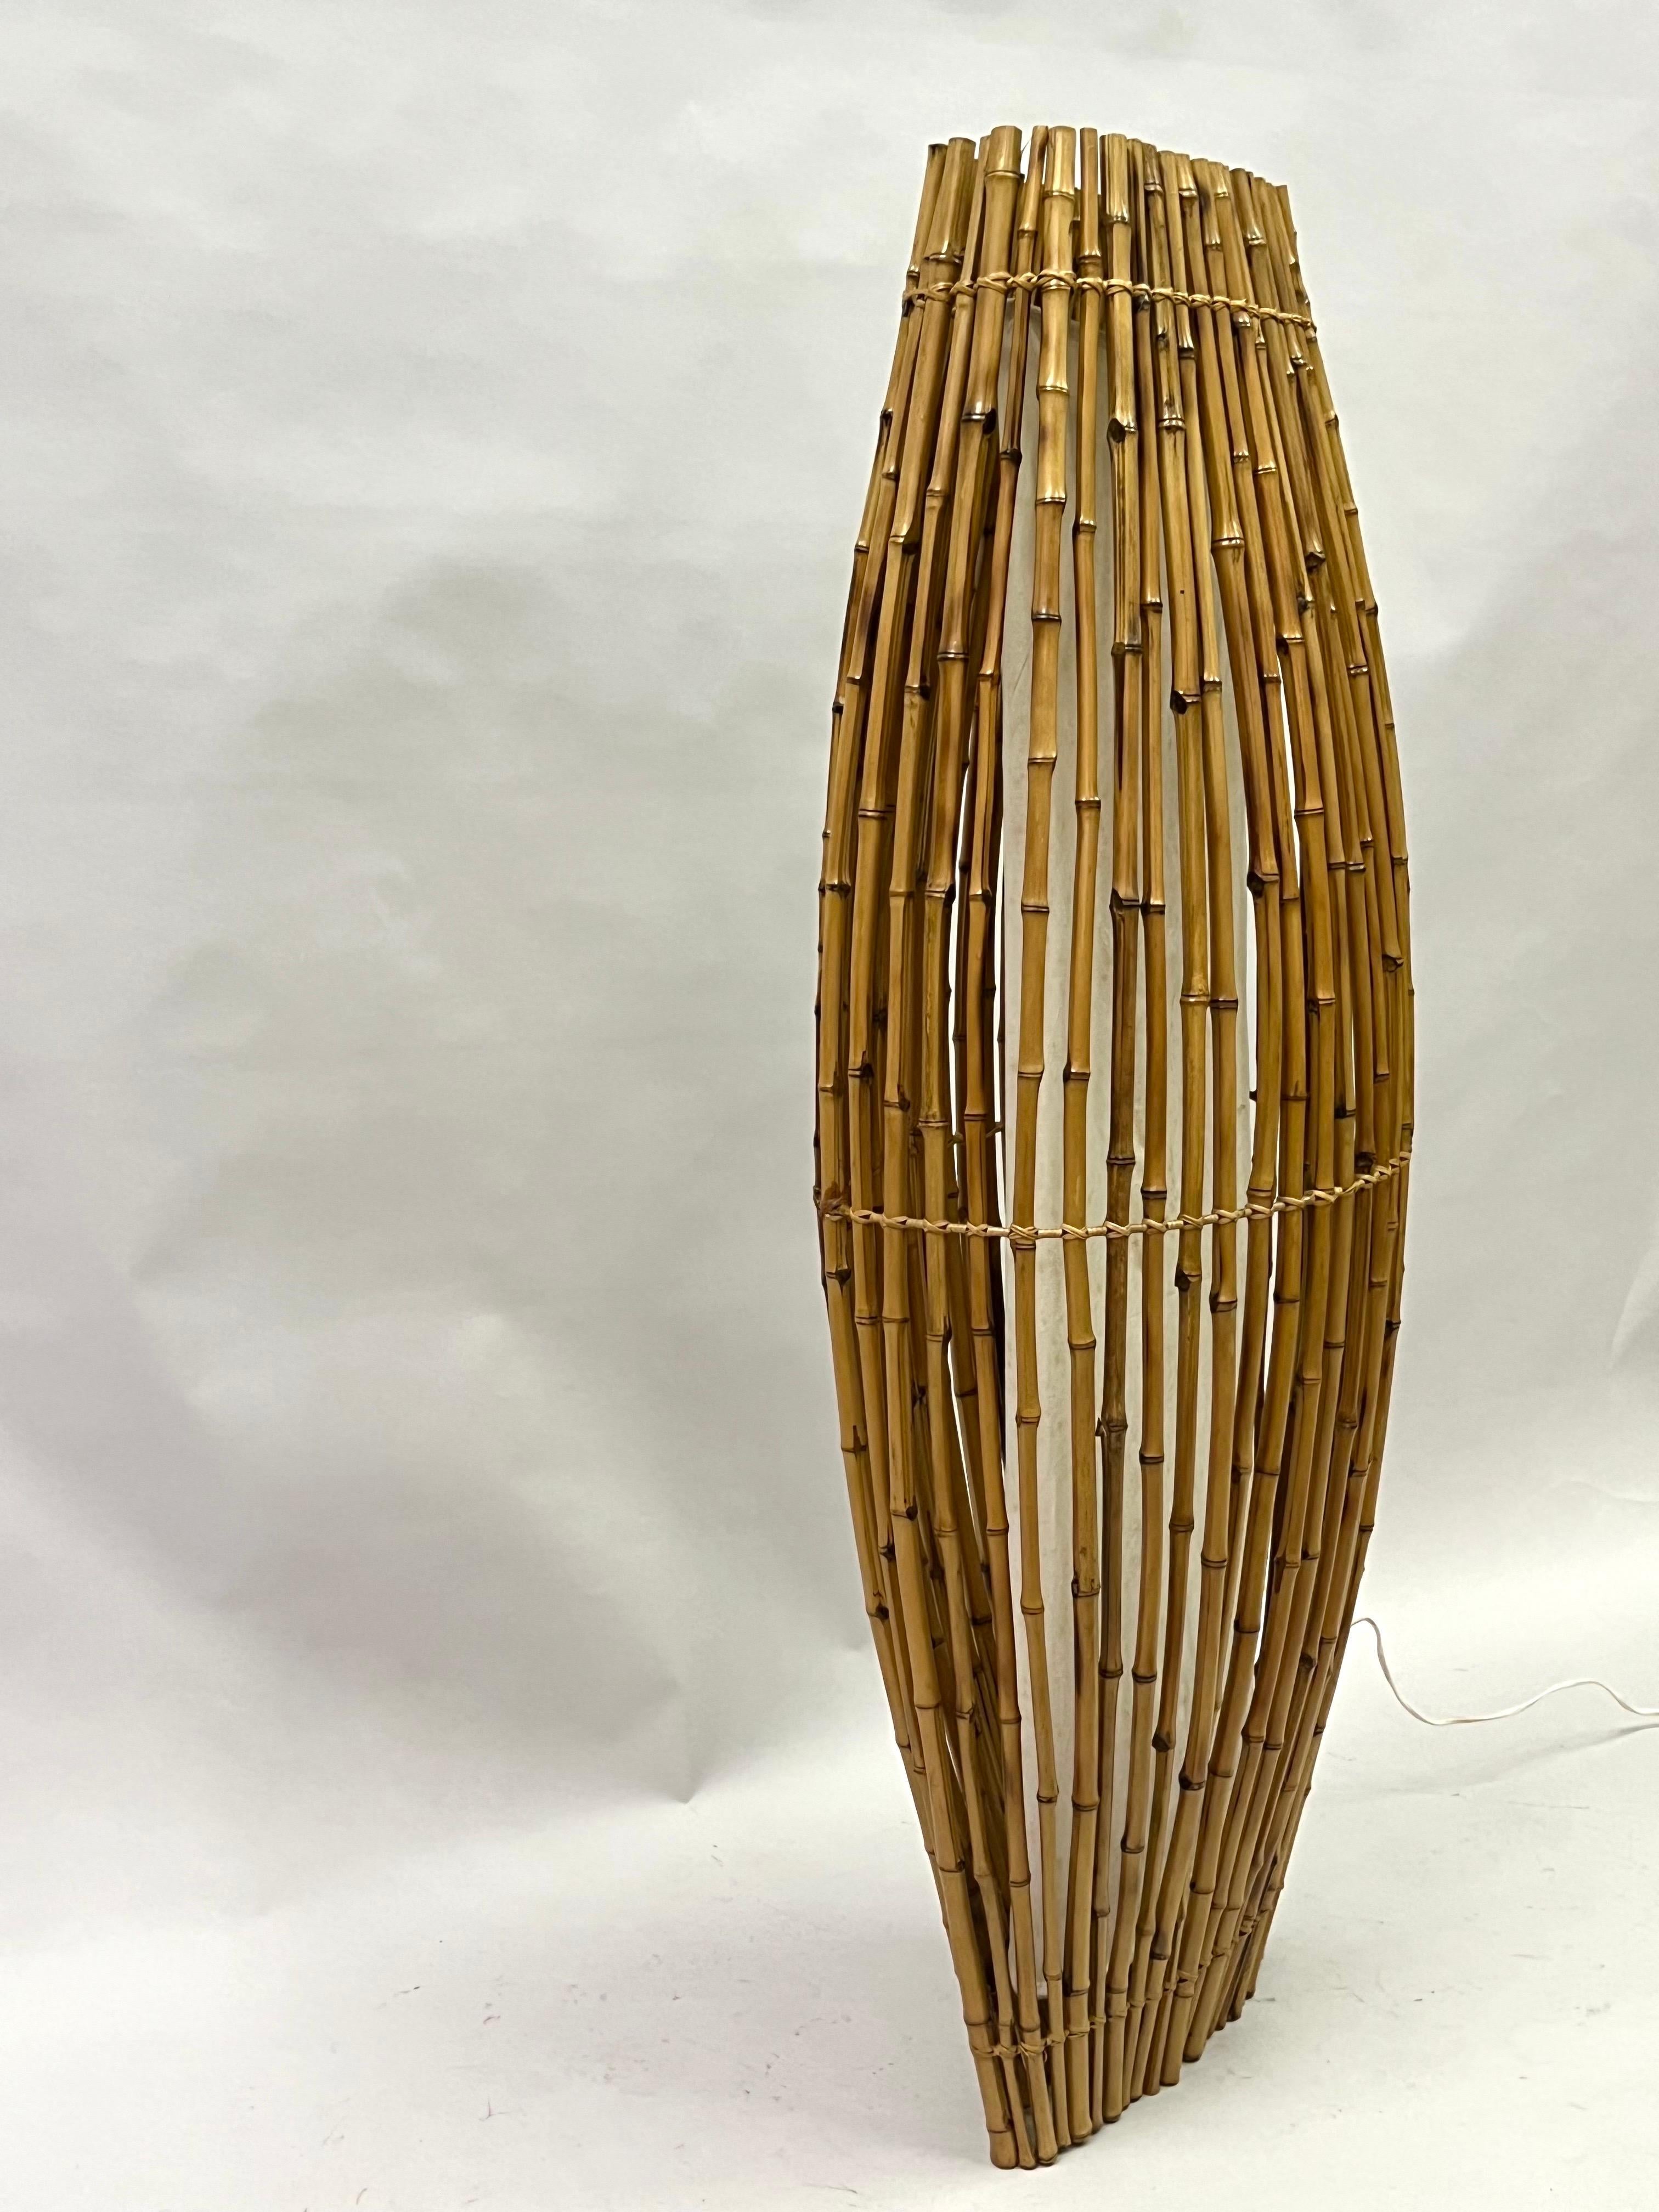 French Midcentury Rattan Light Sculpture/ Floor Lamp, Janine Abraham & D Jan Roi In Good Condition For Sale In New York, NY